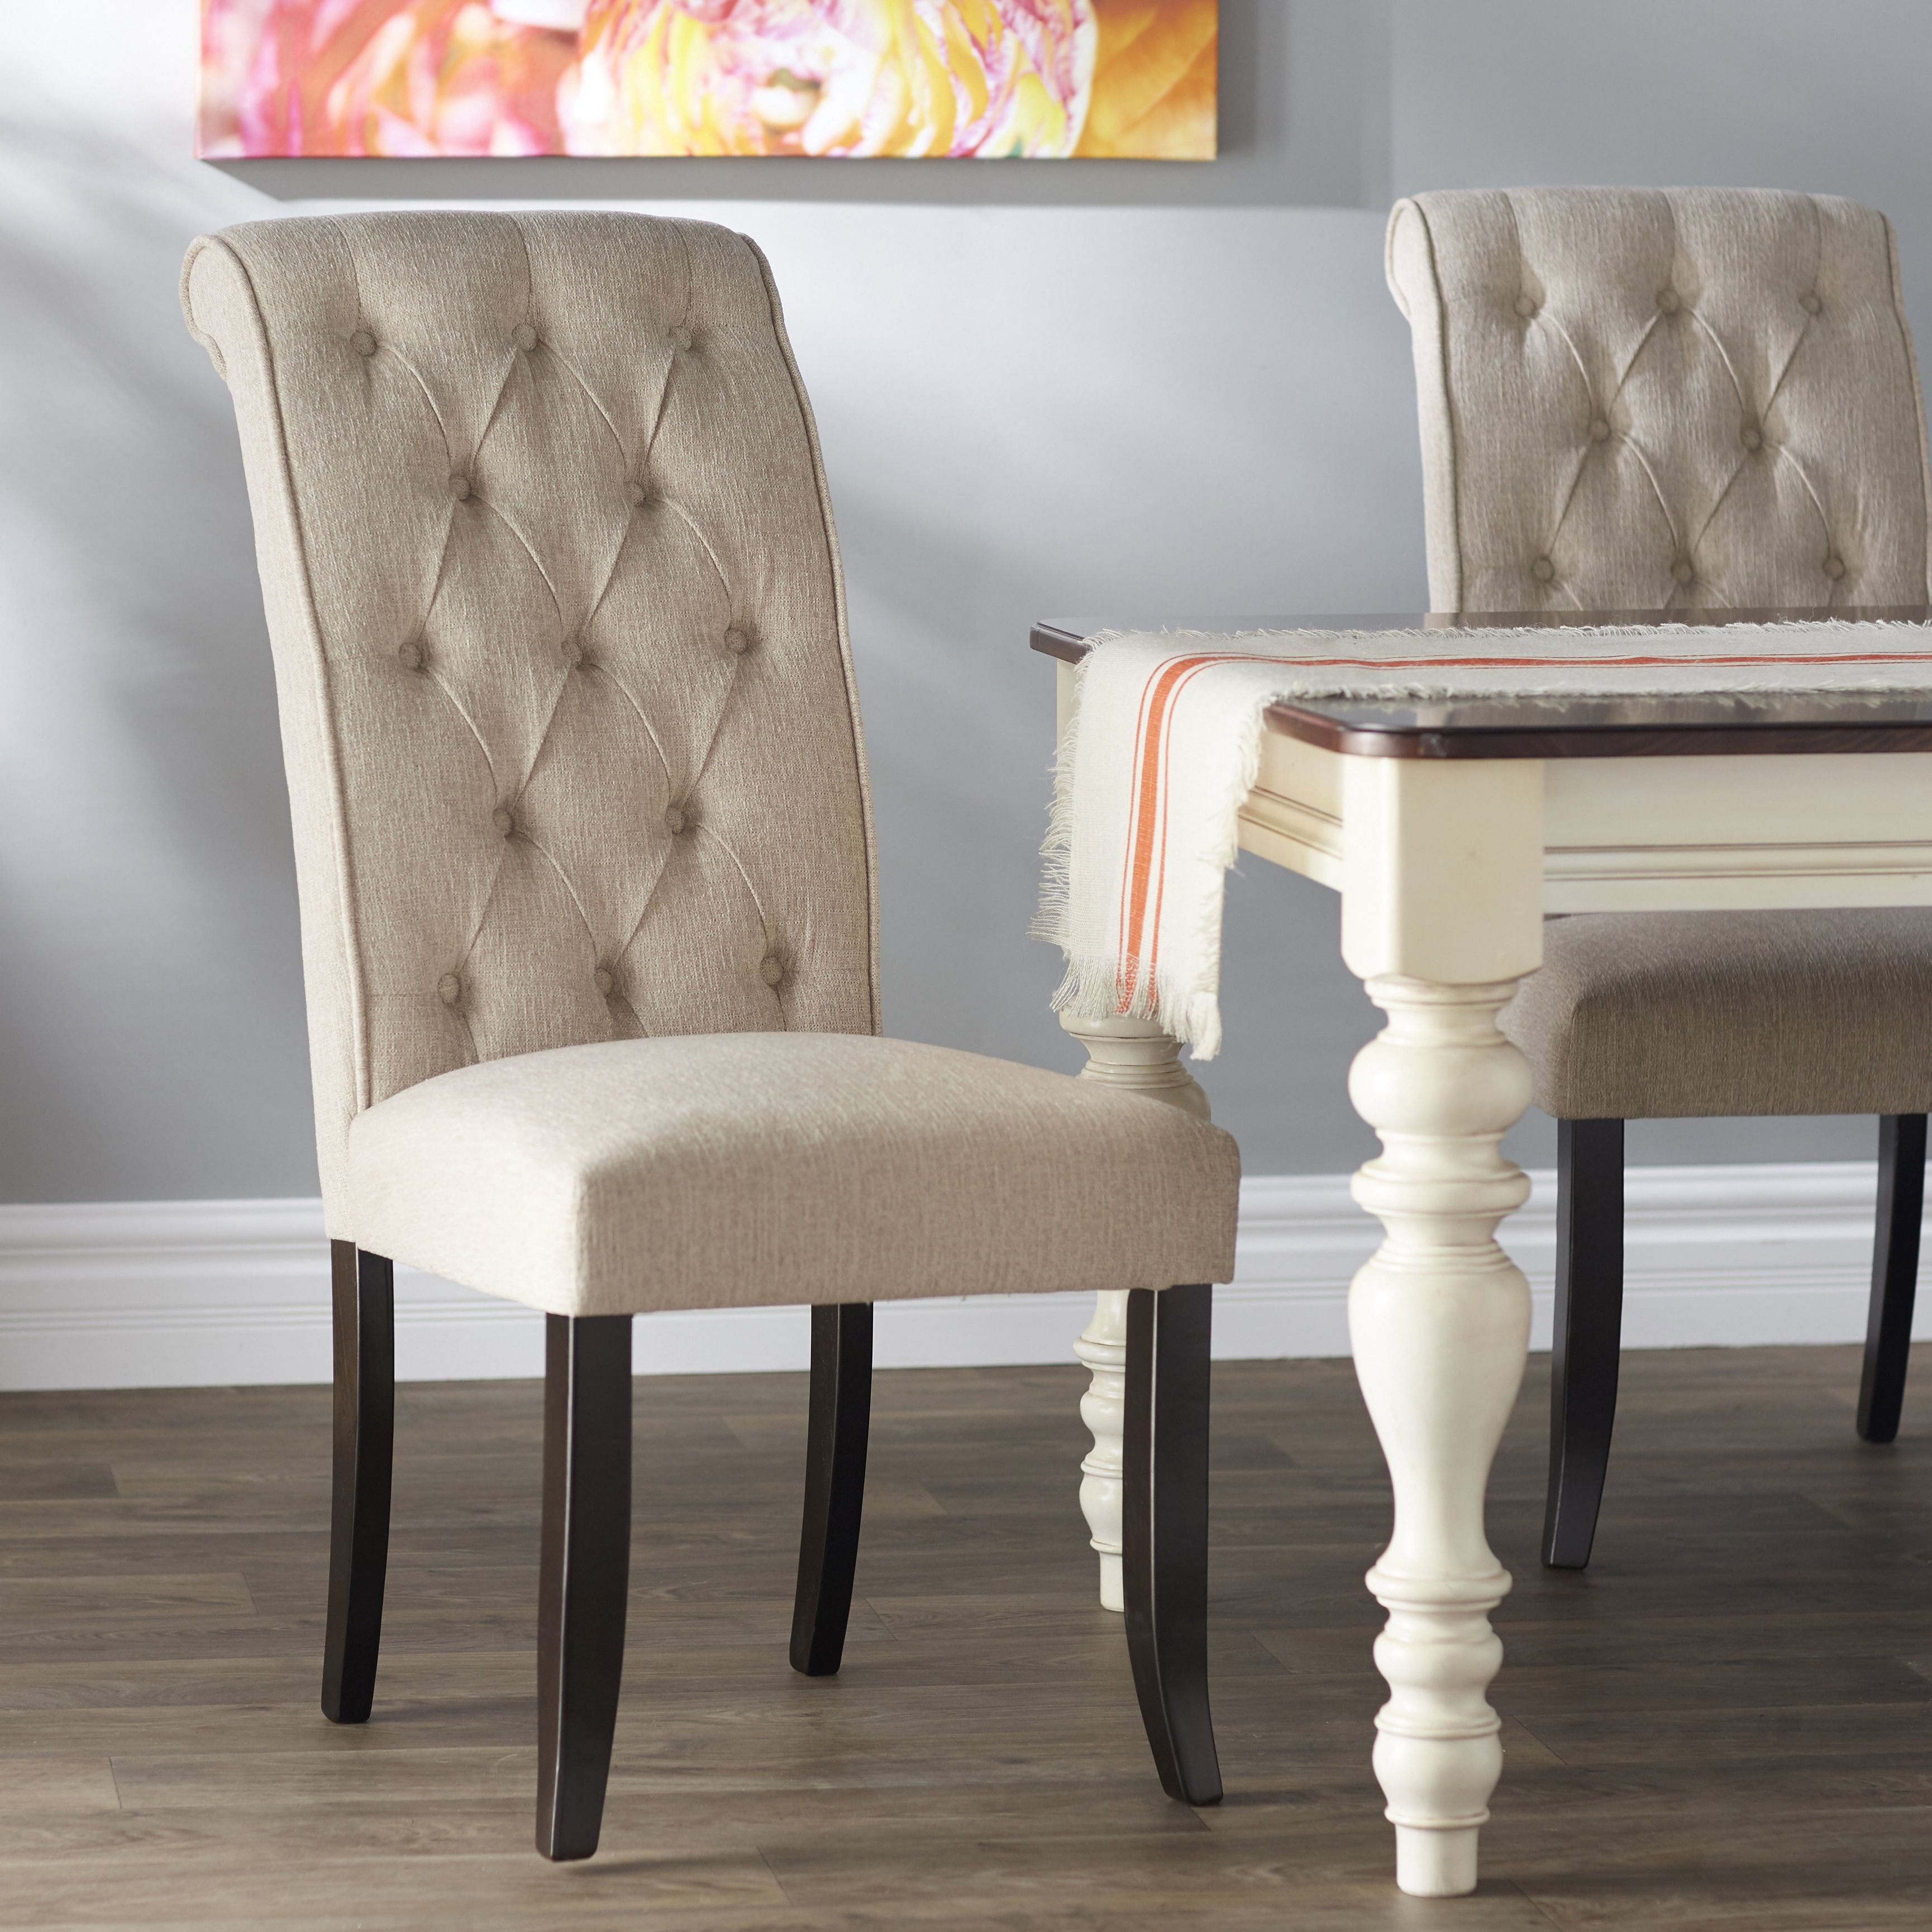 Signature Designashley Carville Tufted Side Chair & Reviews Throughout Most Recent Burton Metal Side Chairs With Wooden Seat (View 19 of 20)